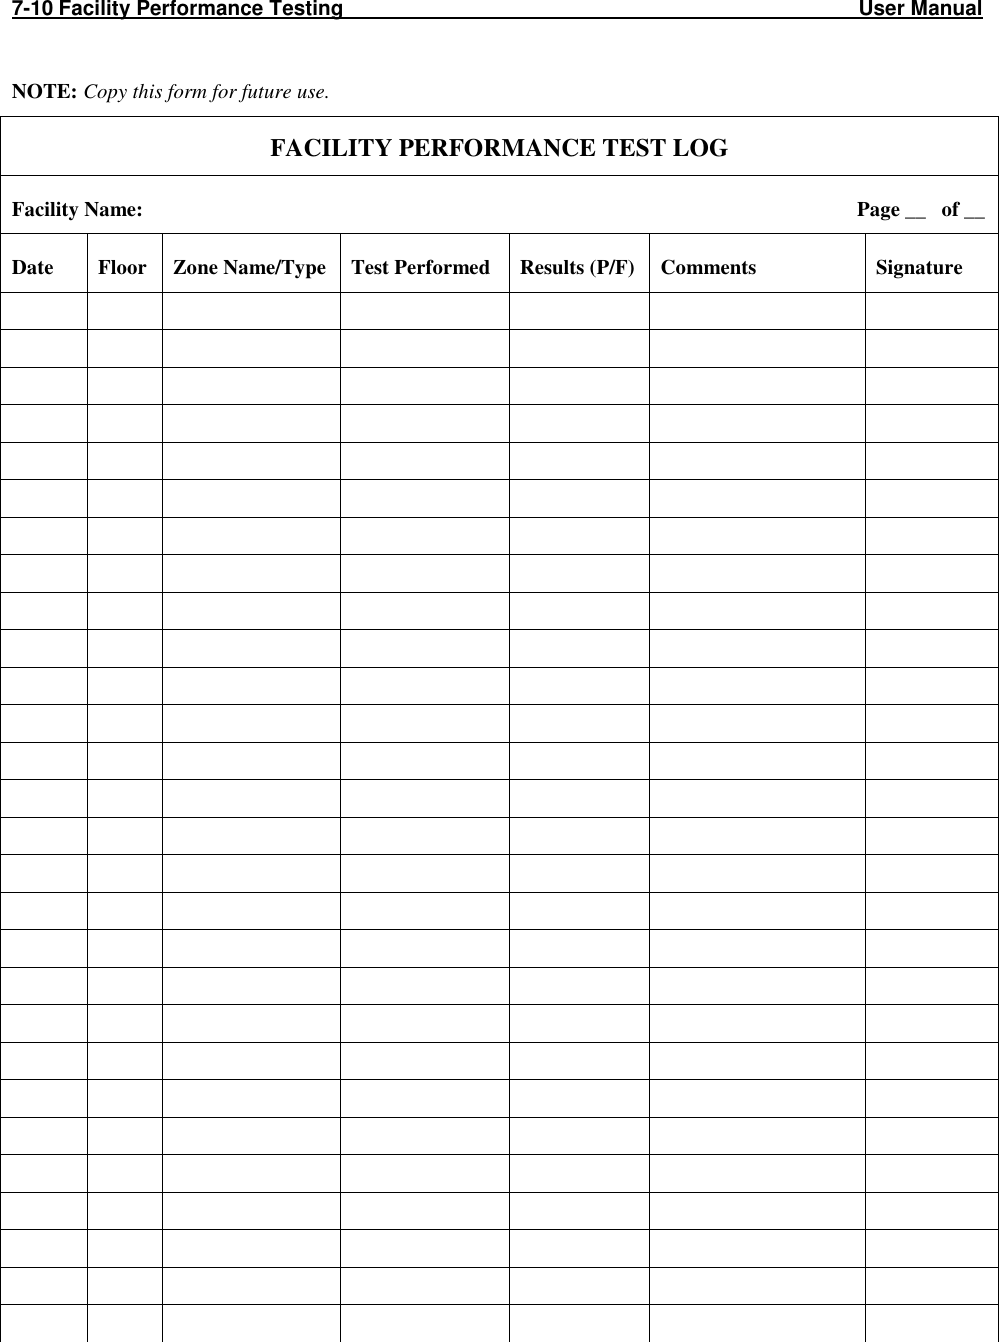 7-10 Facility Performance Testing                                                                                         User Manual                                                         NOTE: Copy this form for future use. FACILITY PERFORMANCE TEST LOG Facility Name:                                                                                                                                         Page __   of __ Date  Floor  Zone Name/Type  Test Performed  Results (P/F)  Comments  Signature                                                                                                                                                                                                      